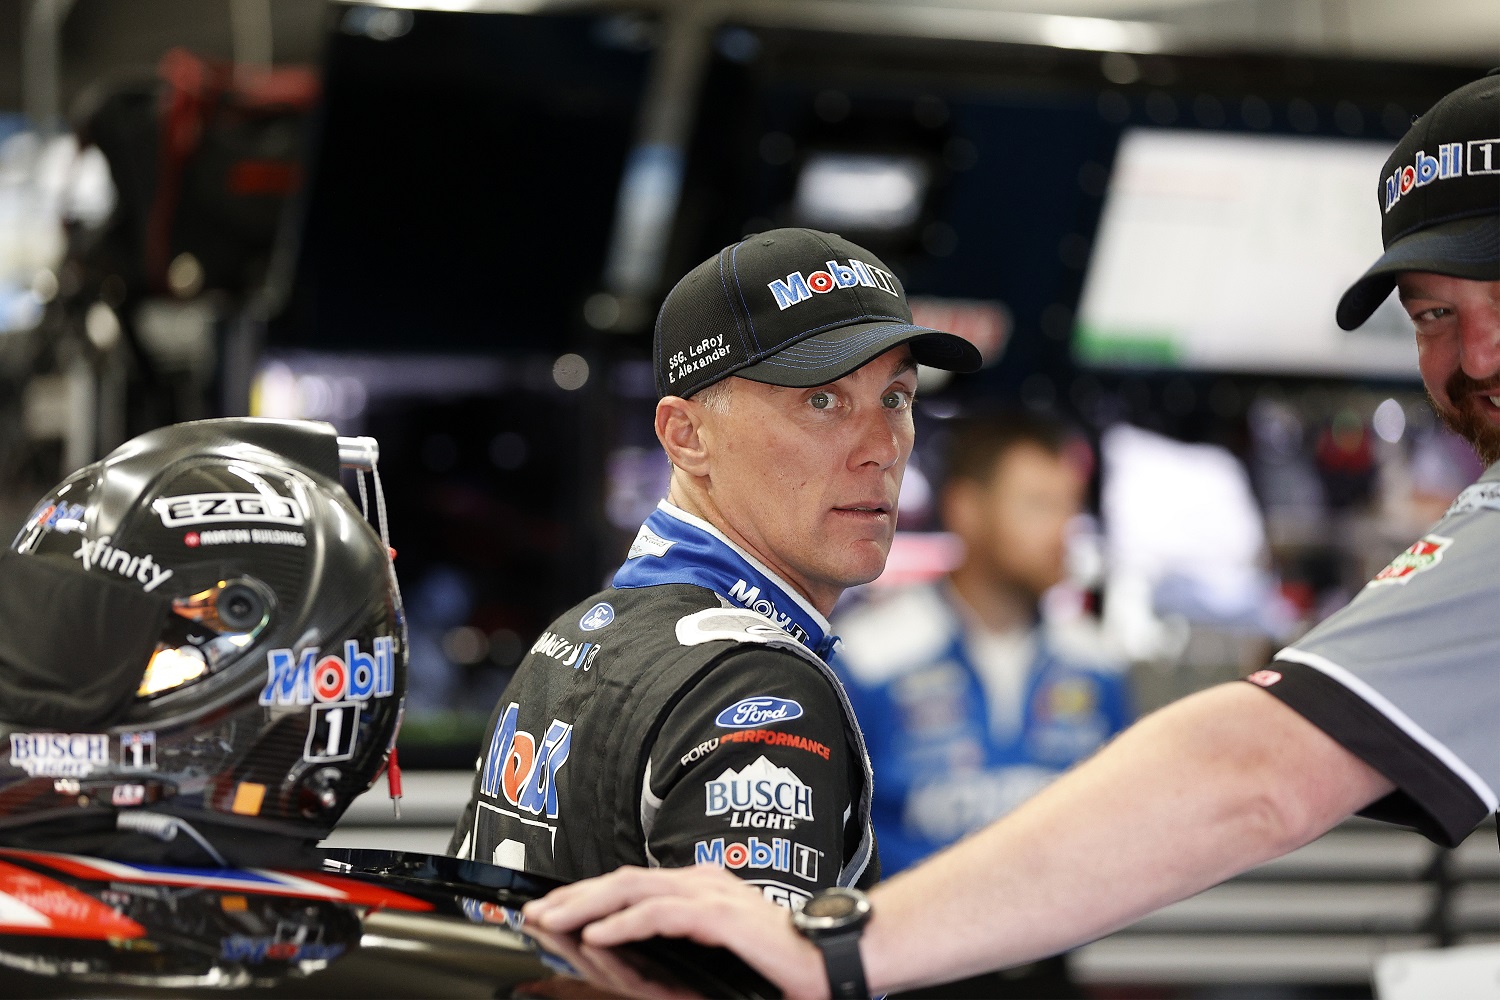 Kevin Harvick waits in the garage during practice for the NASCAR Cup Series Coca-Cola 600 at Charlotte Motor Speedway on May 28, 2021, in Concord, North Carolina. | Maddie Meyer/Getty Images